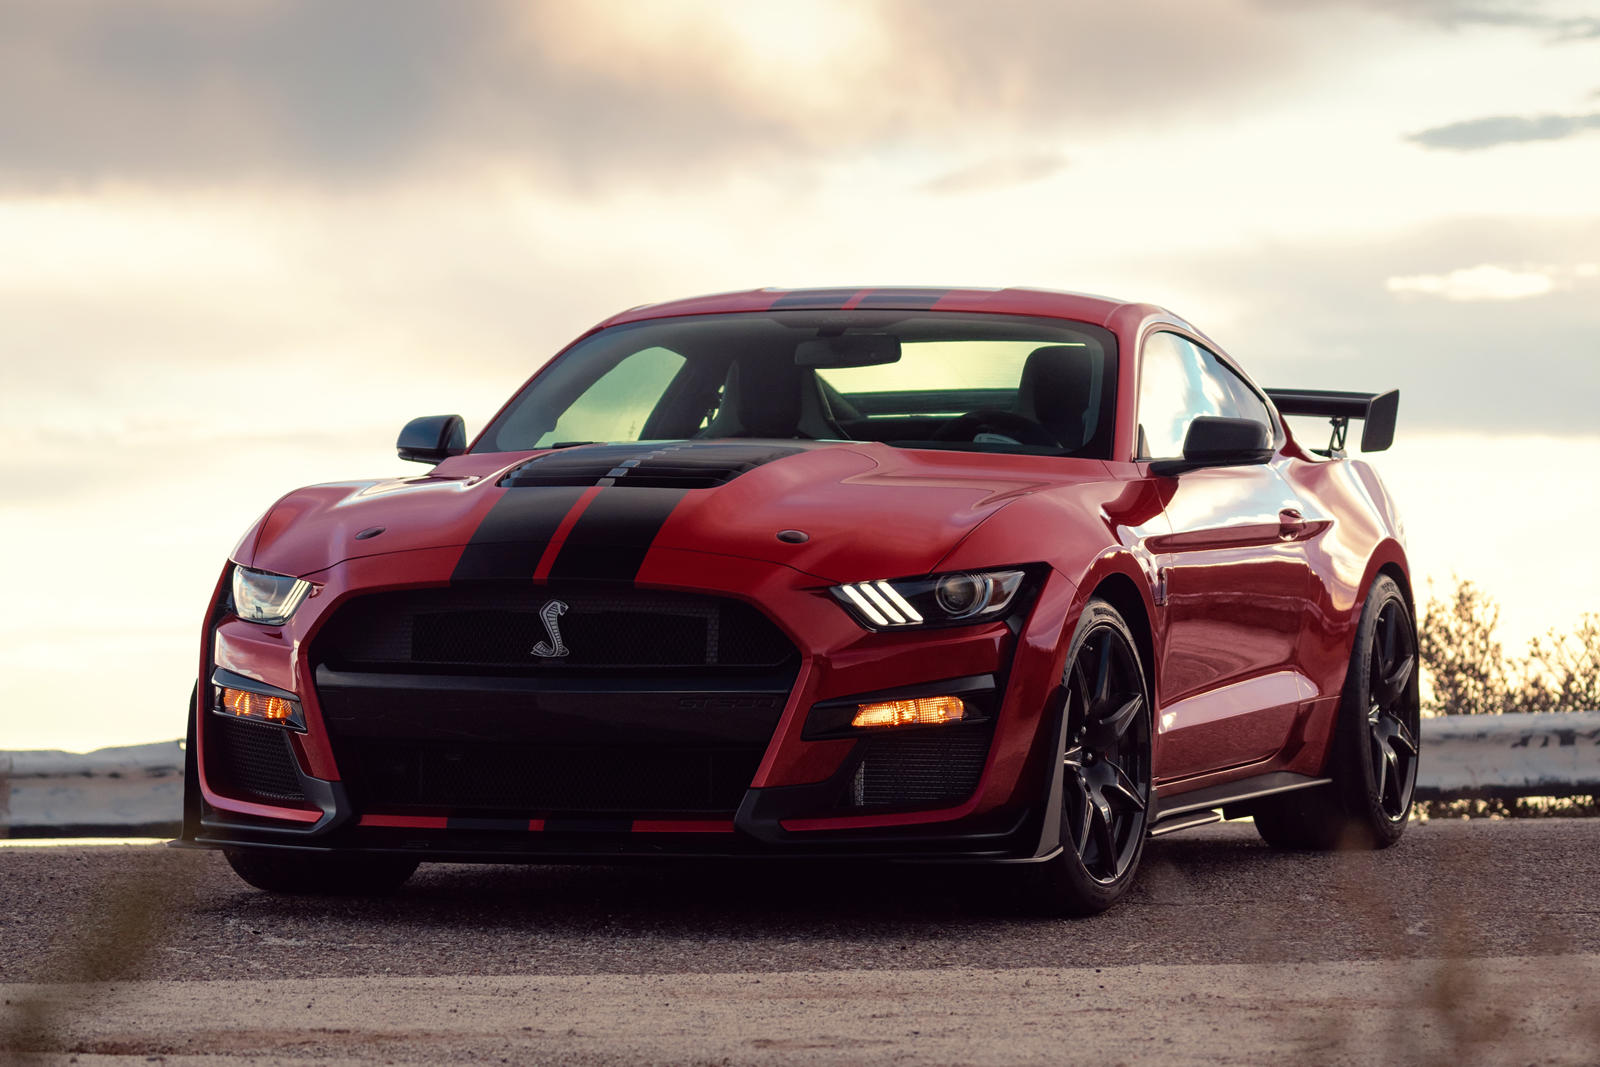 Used Ford Mustang Shelby GT500 Red For Sale Near Me: Check Photos And